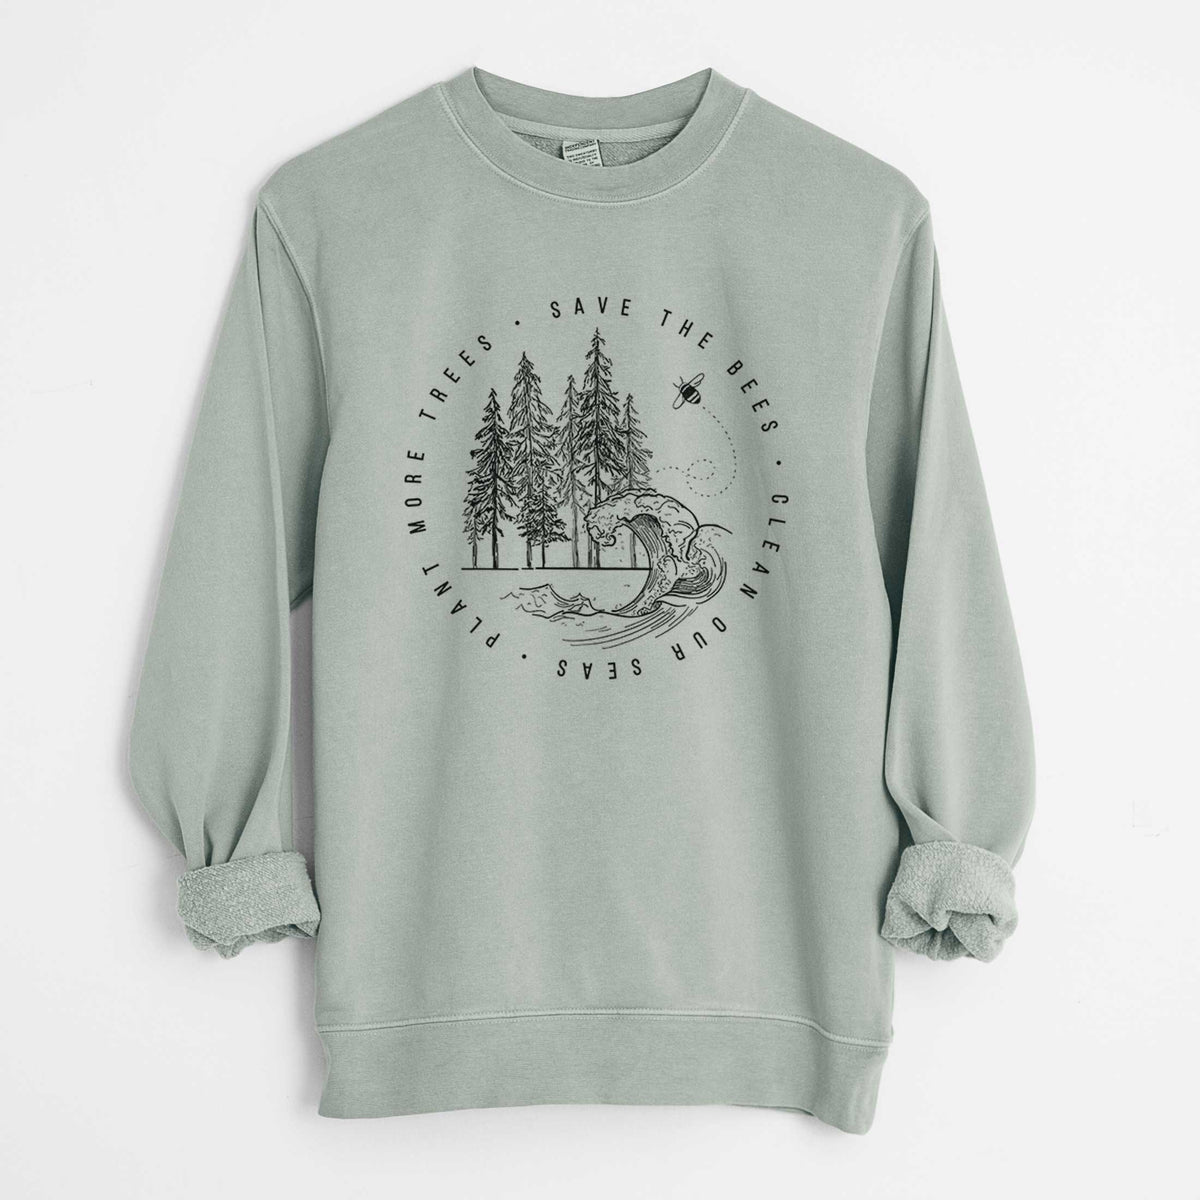 Save the Bees, Clean our Seas, Plant more Trees - Unisex Pigment Dyed Crew Sweatshirt